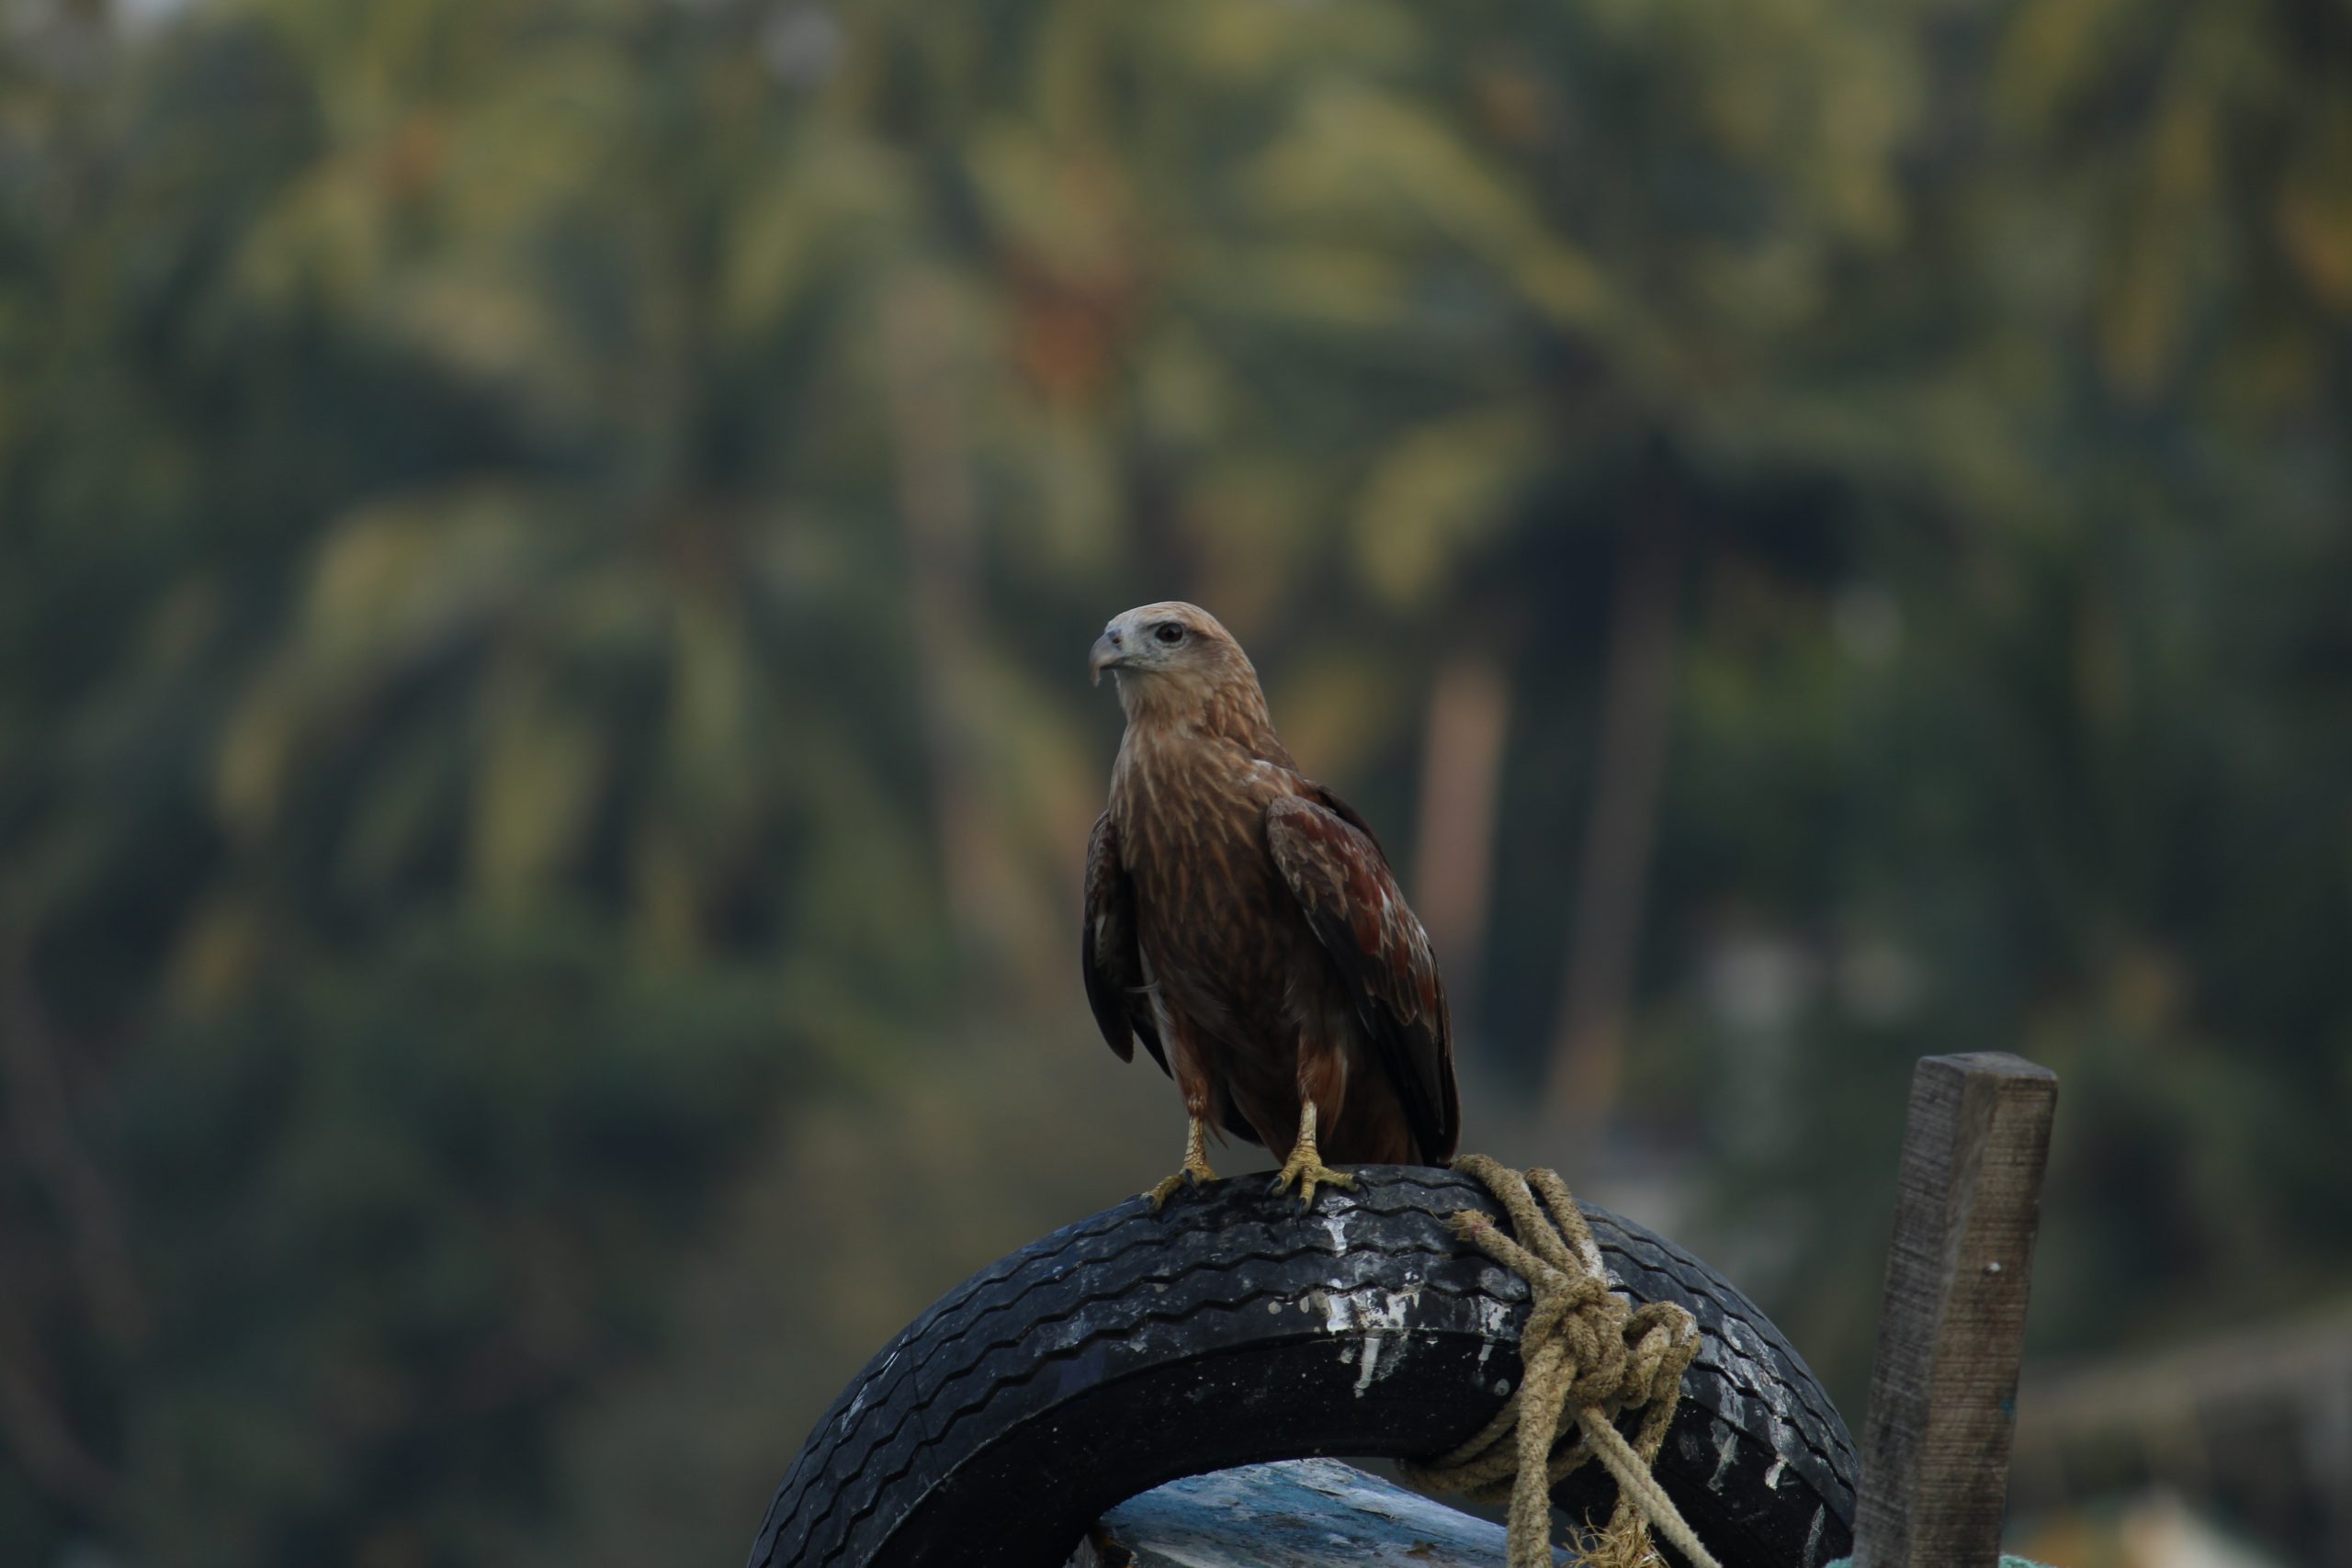 An eagle sitting on tyre